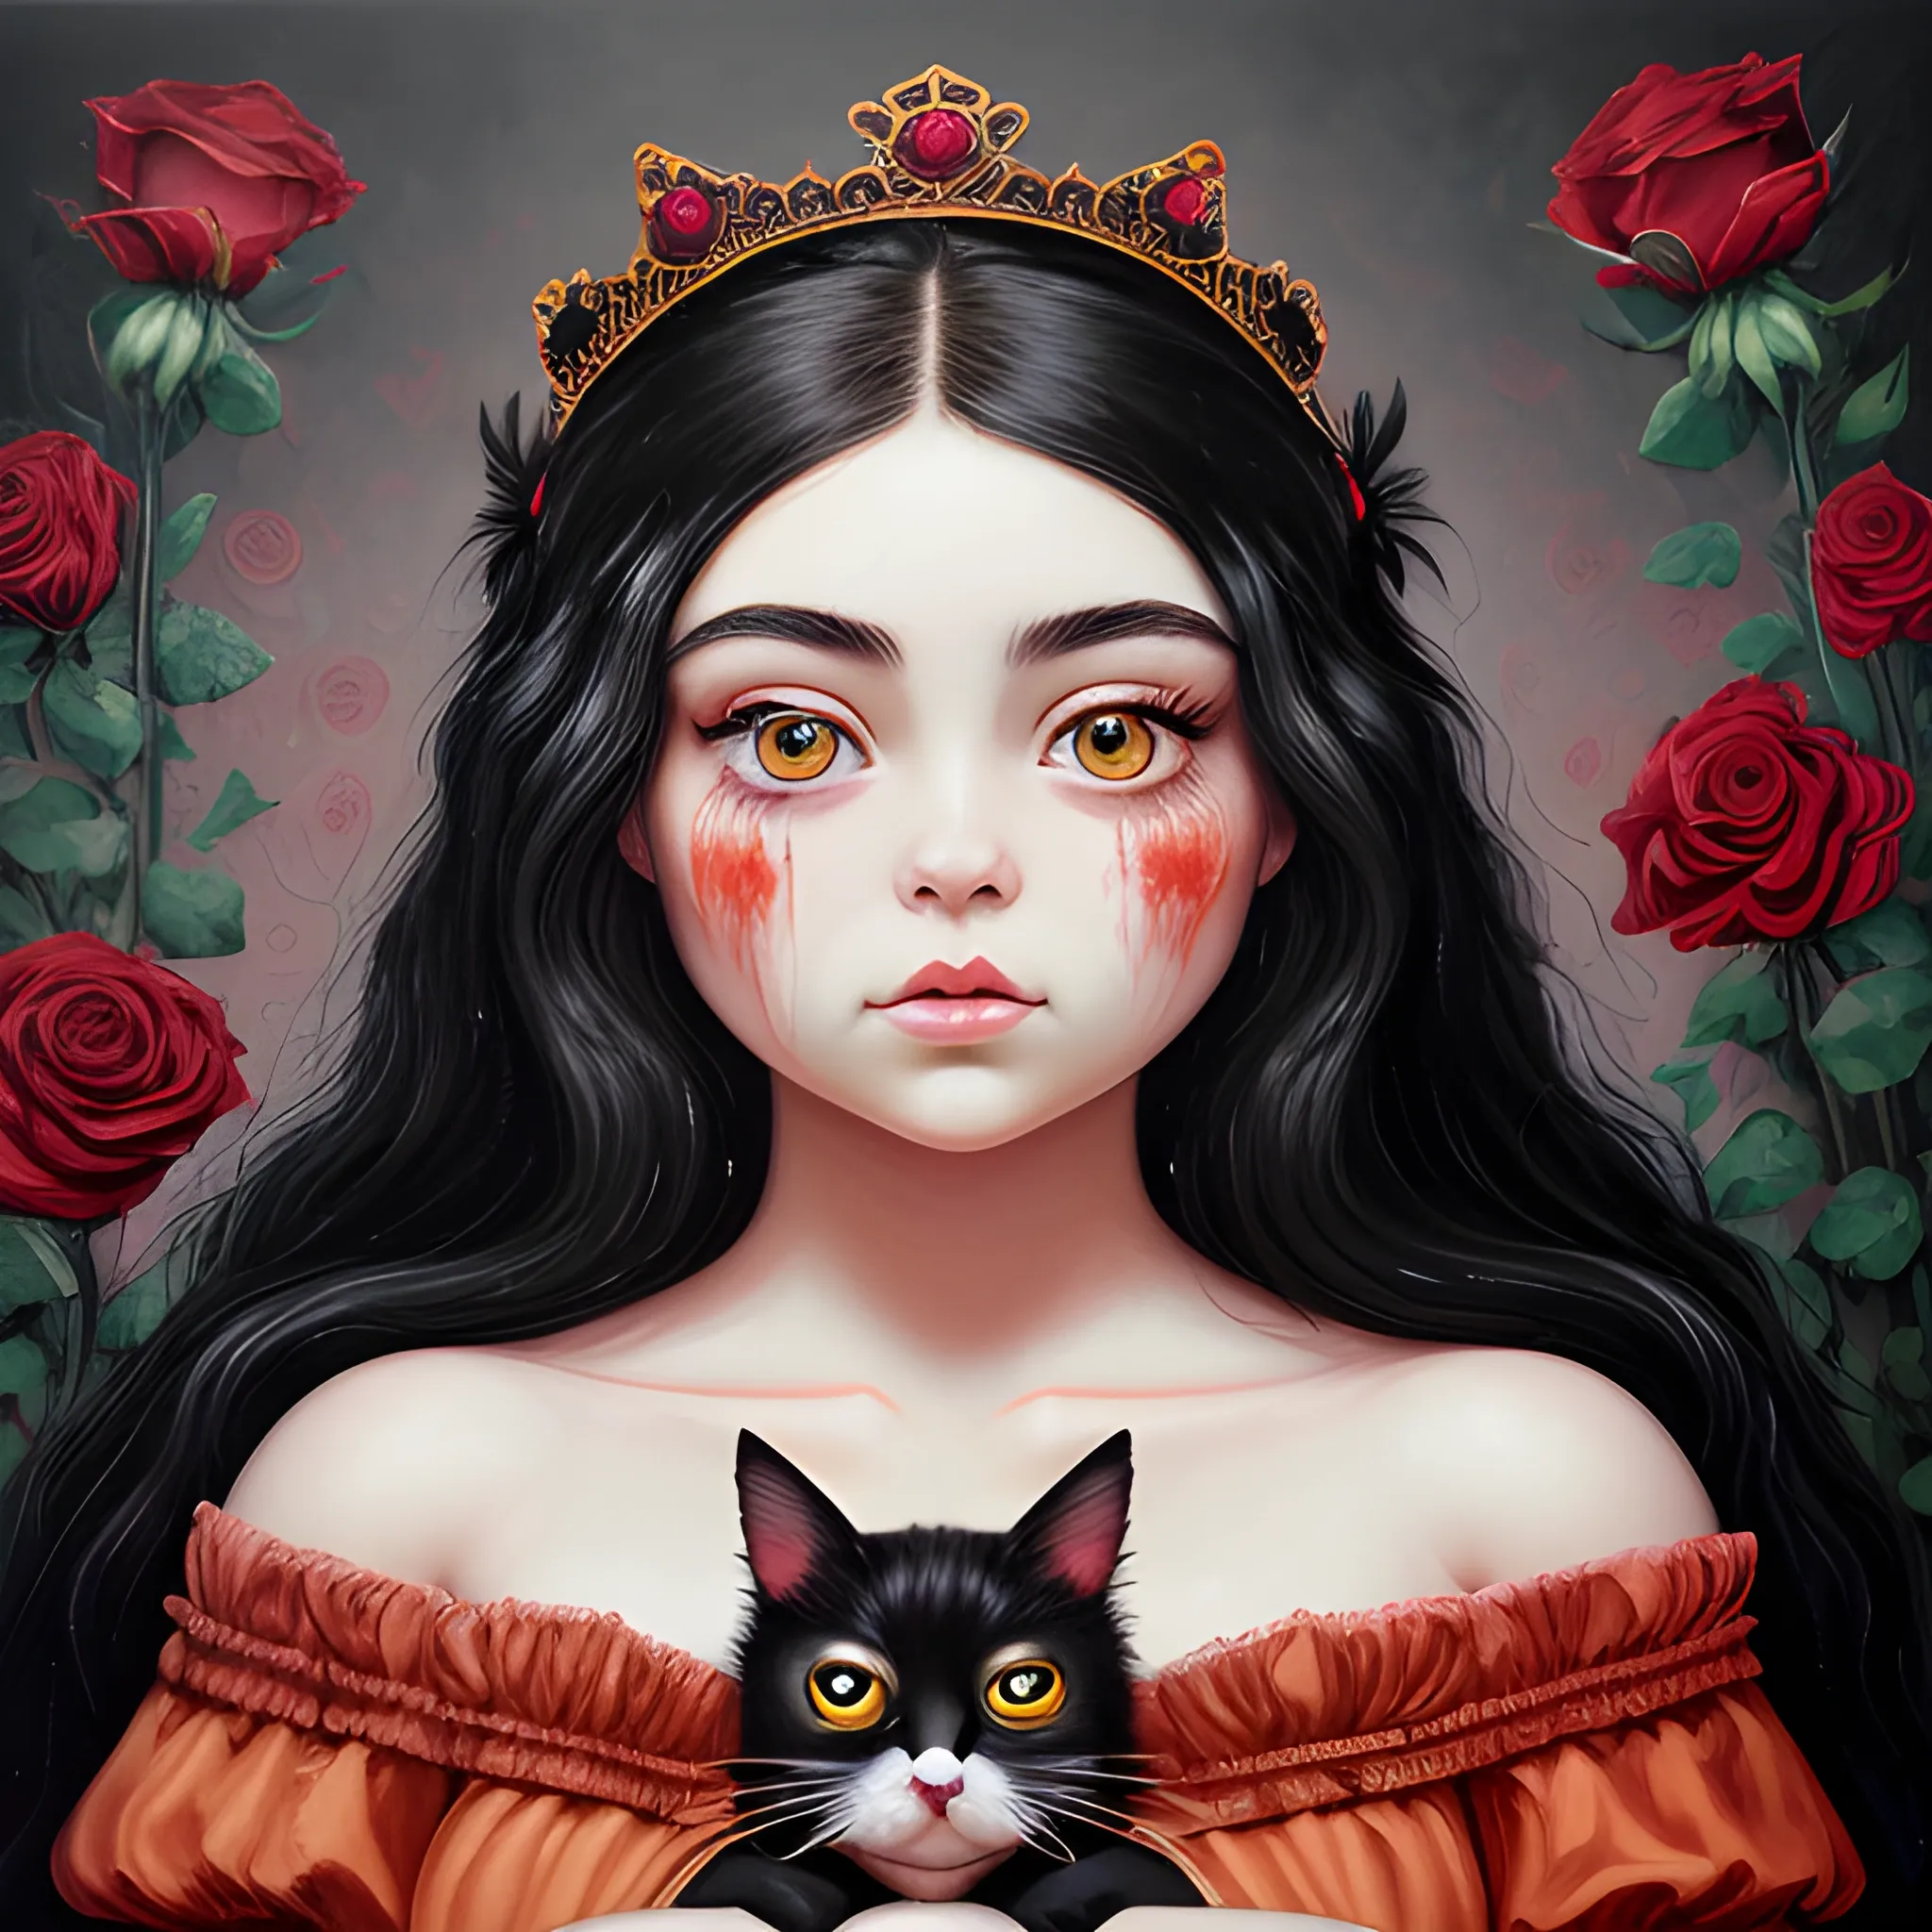 (((high detail))), best quality, Warm Colors, (detailed), (high resolution)Black long-haired female, curvy face, with rosy cheeks, big black eyes, thick eyelashes, thick peach lips, thick eyebrows,  with a black and red dress, roses of backround  
holding a bloody crown in her hand, with a cat in her lap wallper ,Trippy, Oil Painting